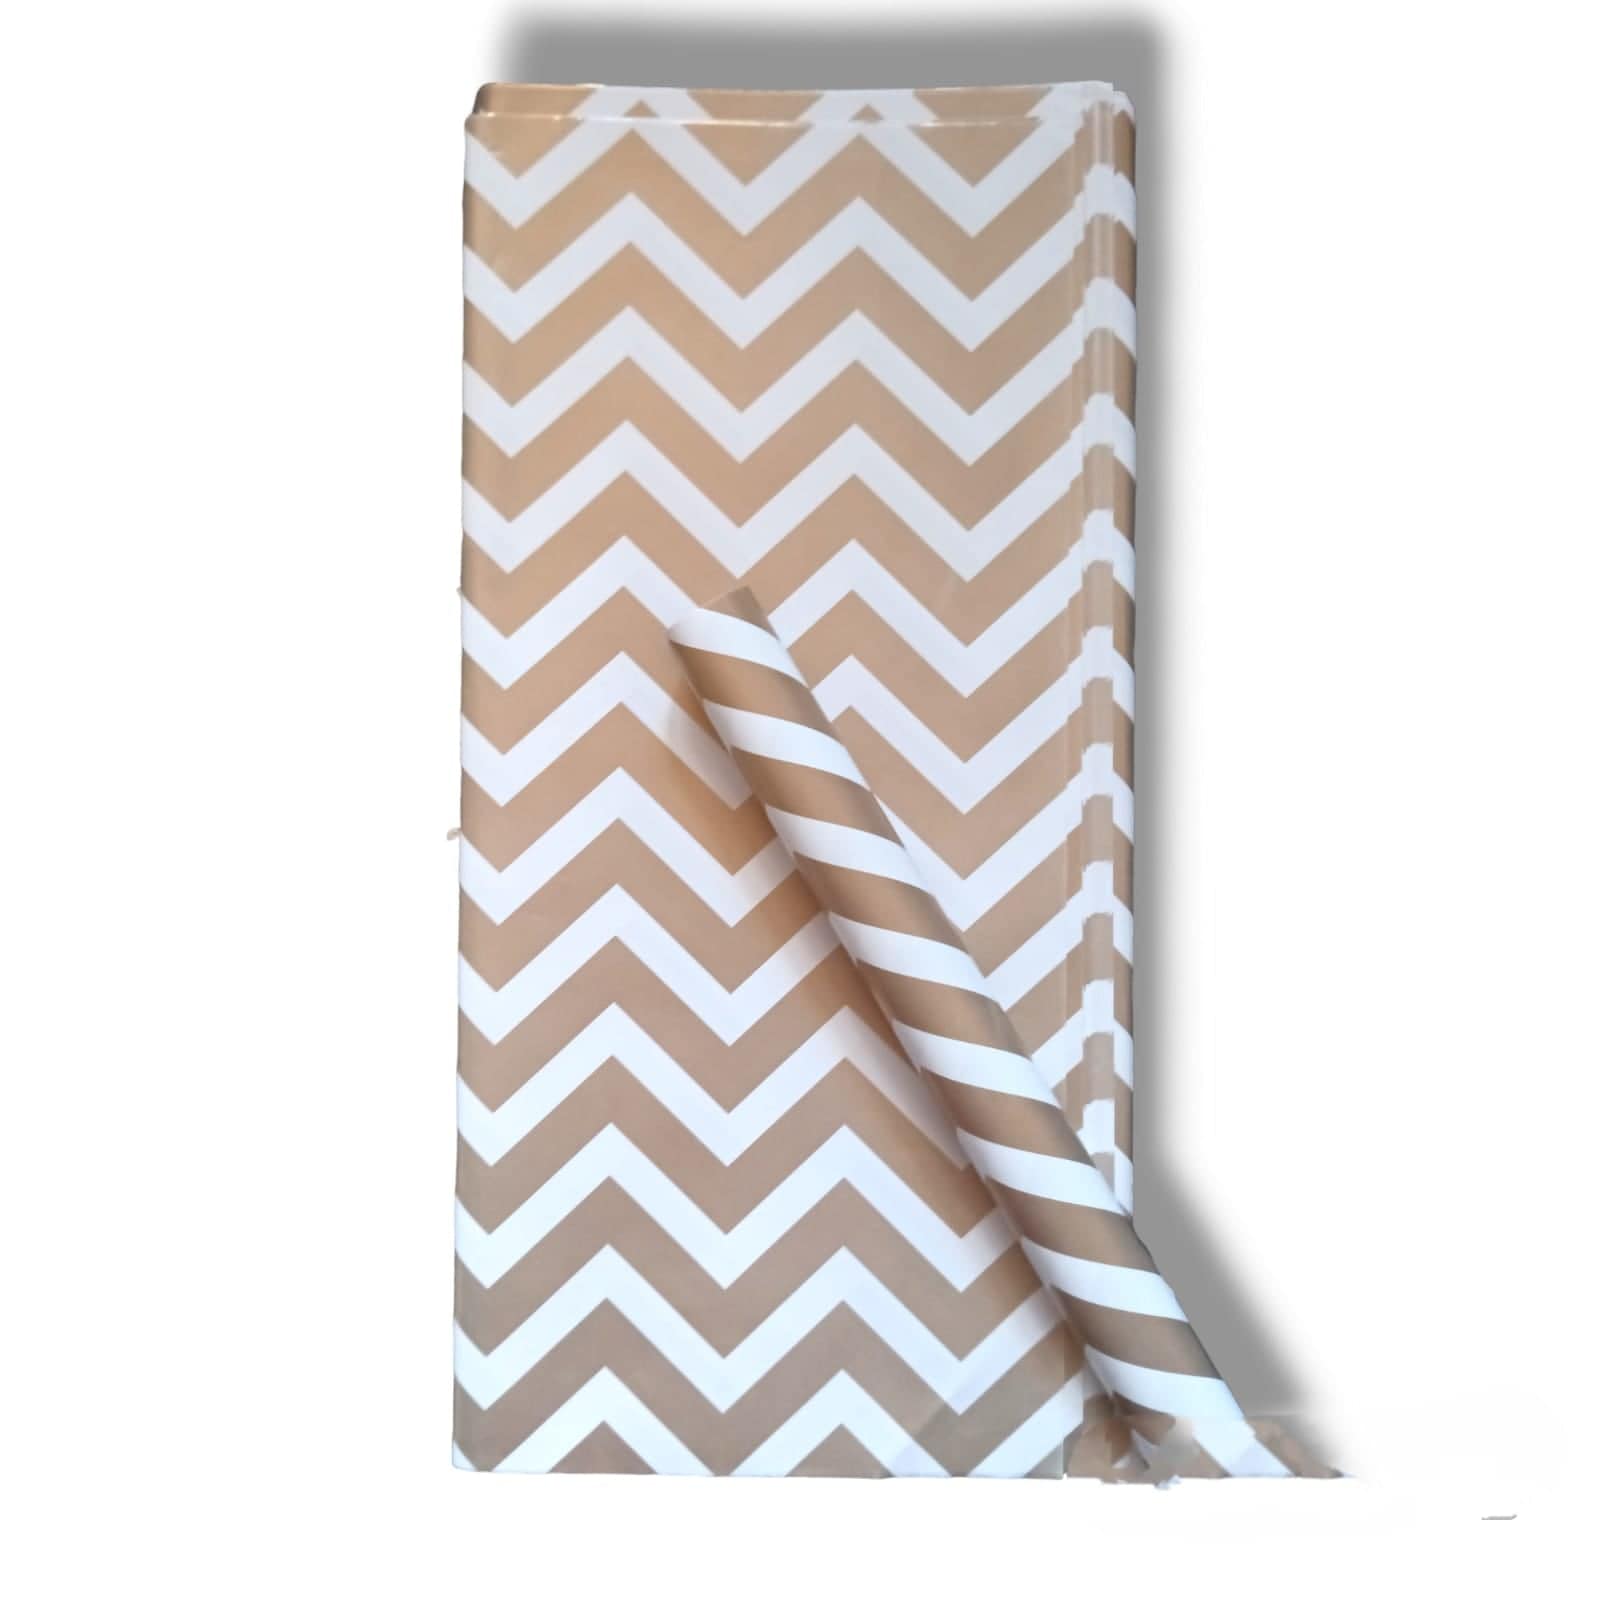 Honesty papers Wrapping Paper Aerolite Zig Zag Brown Wrapping paper I Pack of 1 Sheet